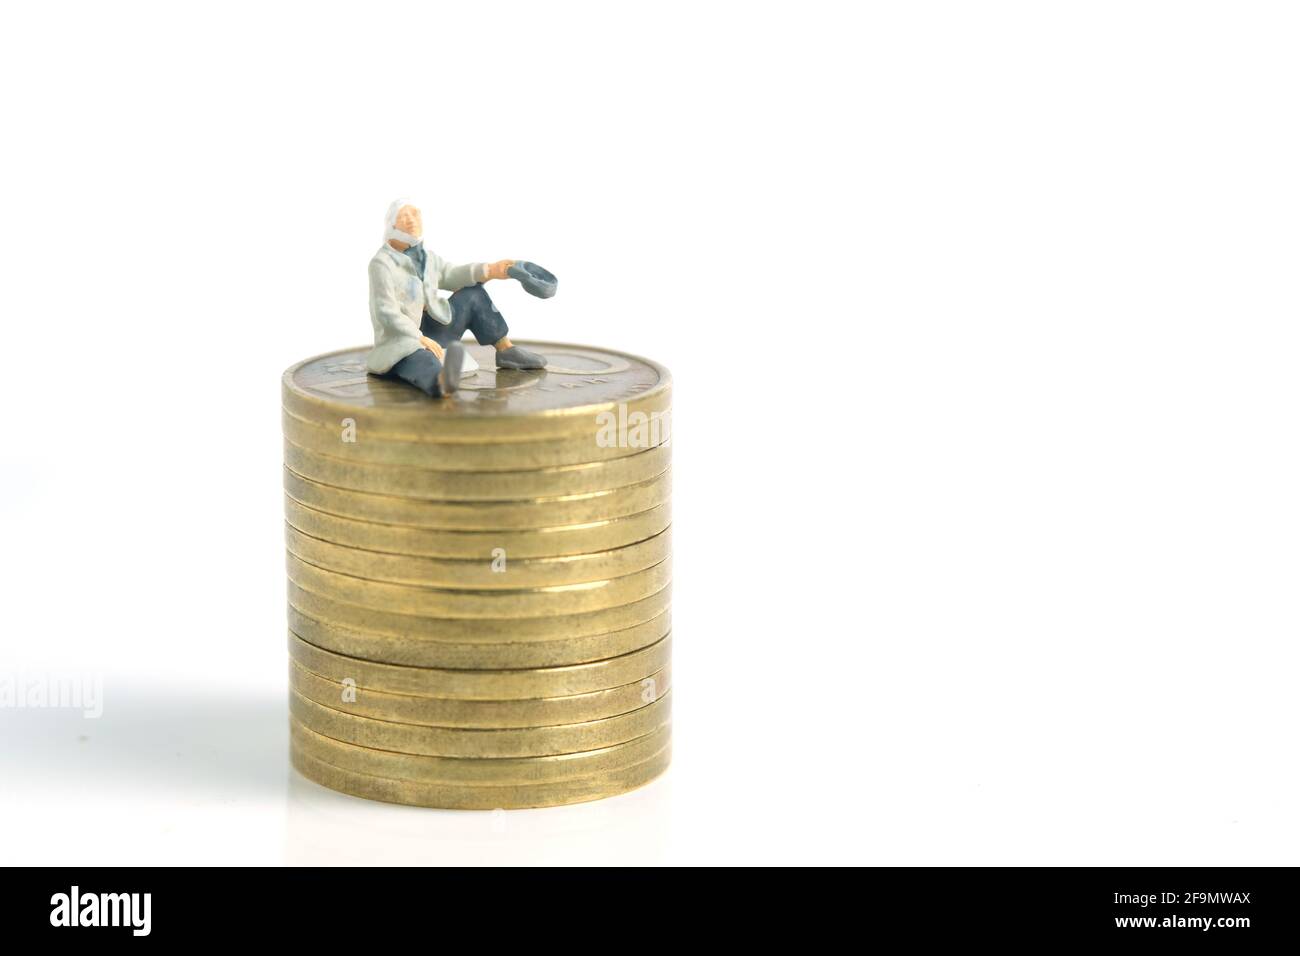 Miniature tiny people toys photography. A poor man or a beggar sit above gold coin stack, isolated on white background Stock Photo